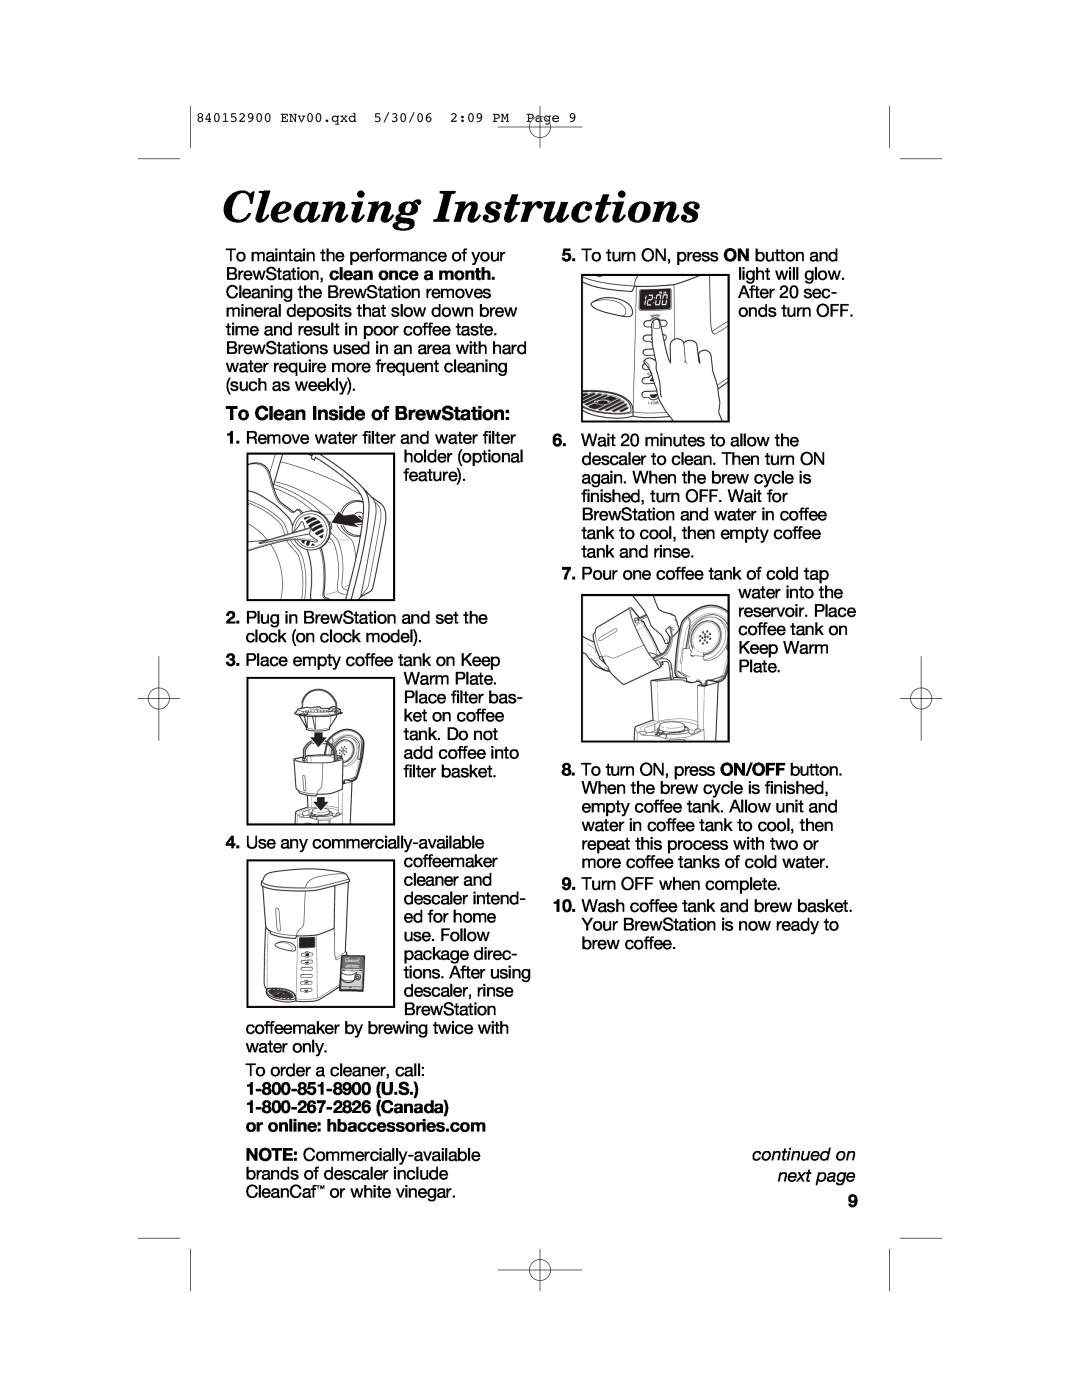 Hamilton Beach 47535C manual Cleaning Instructions, To Clean Inside of BrewStation, or online hbaccessories.com 